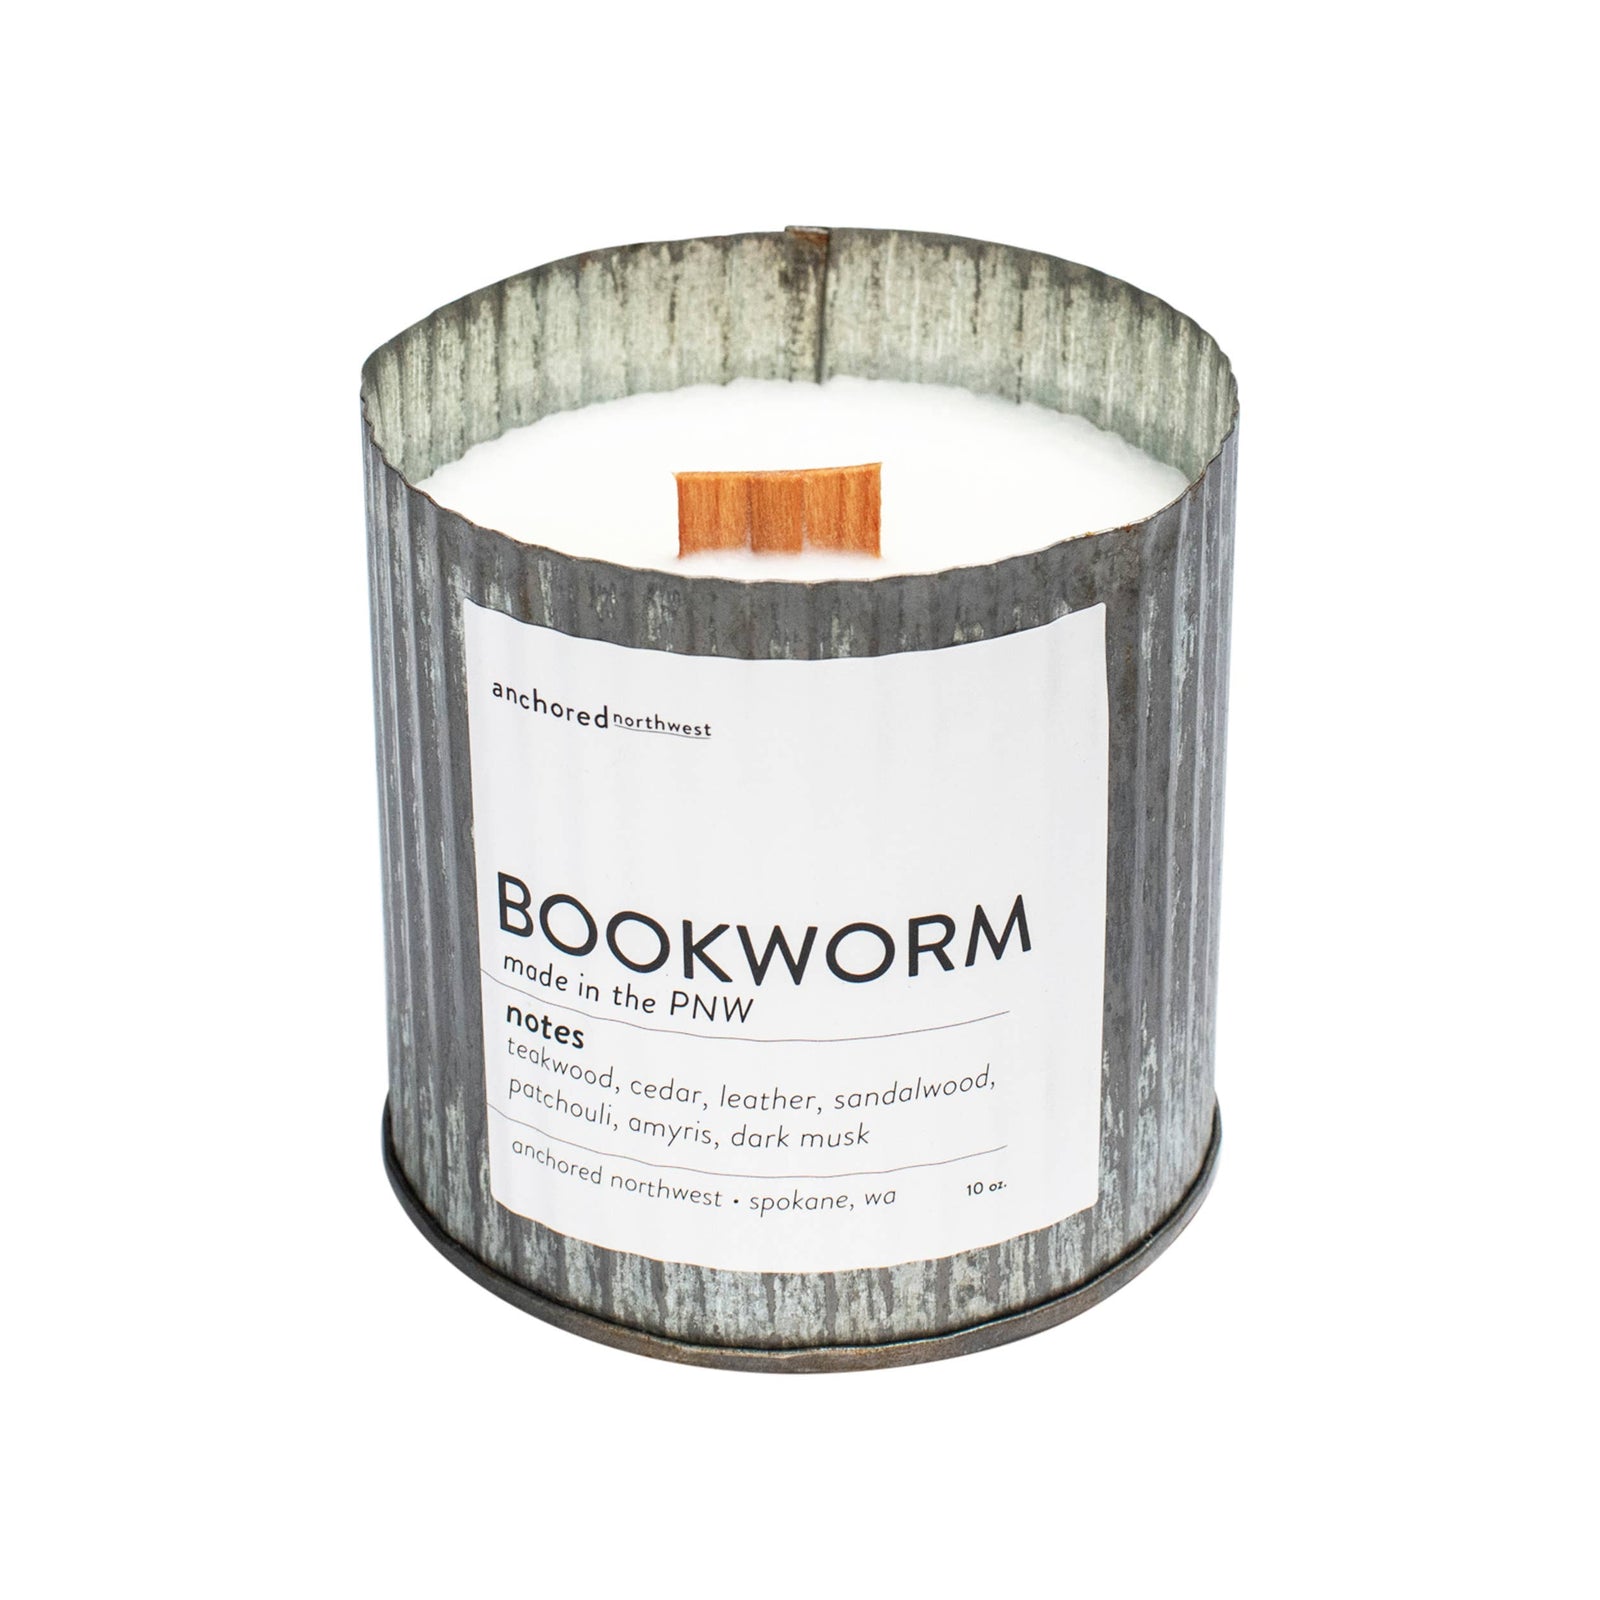 Bookworm Wood Wick Rustic Farmhouse Soy Candle